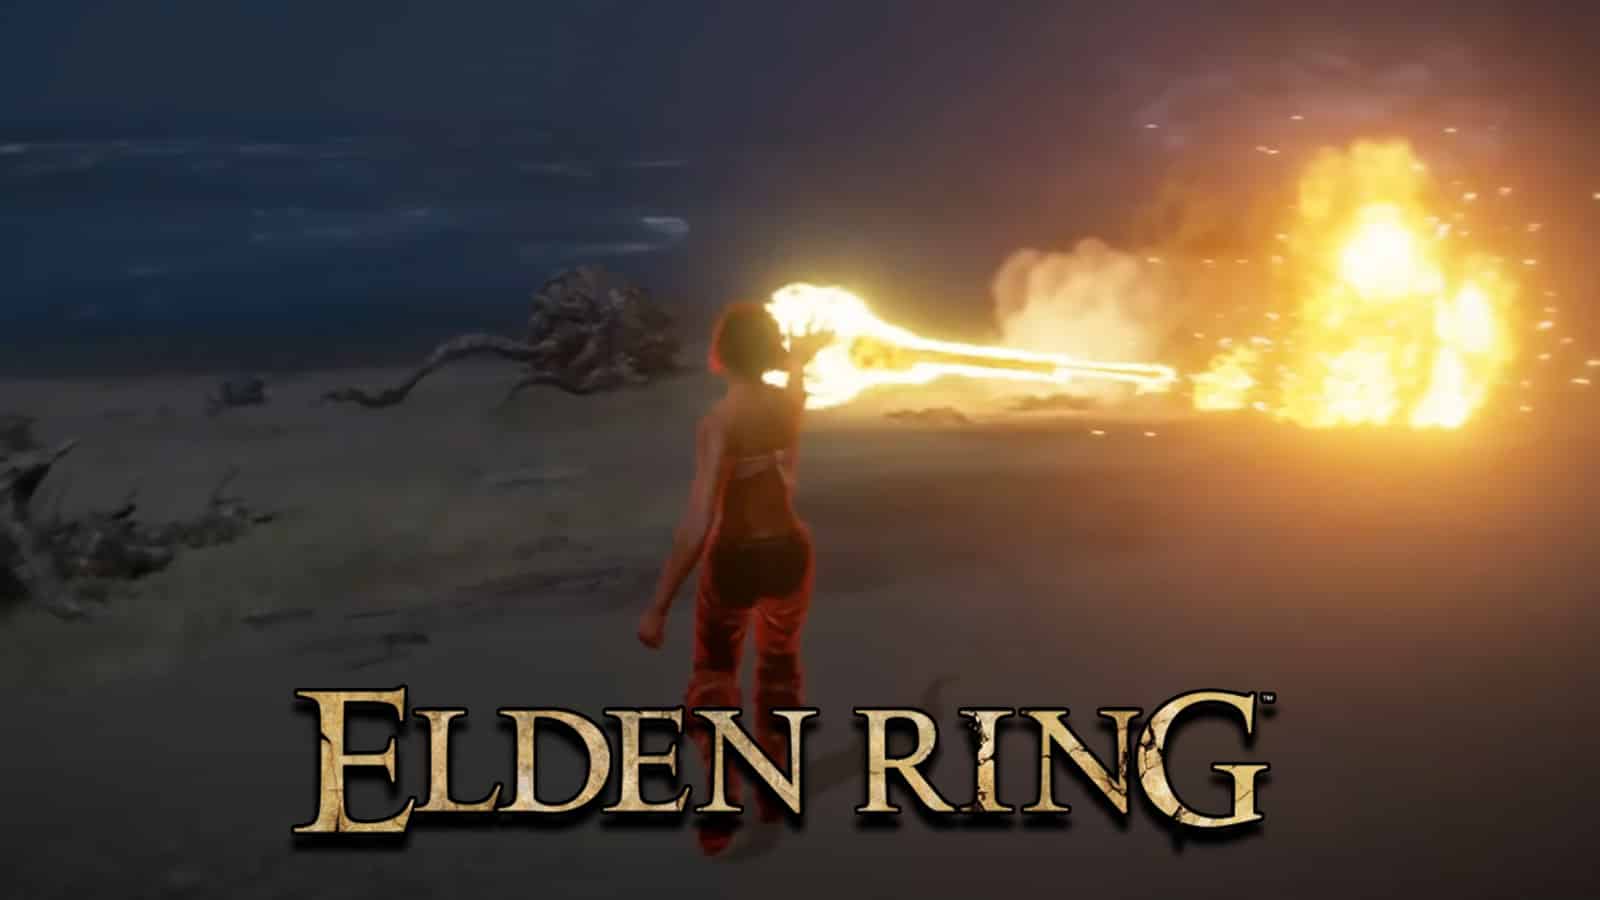 Elden Ring character shooting flames by YouTuber Malcolm Reynolds screenshot.